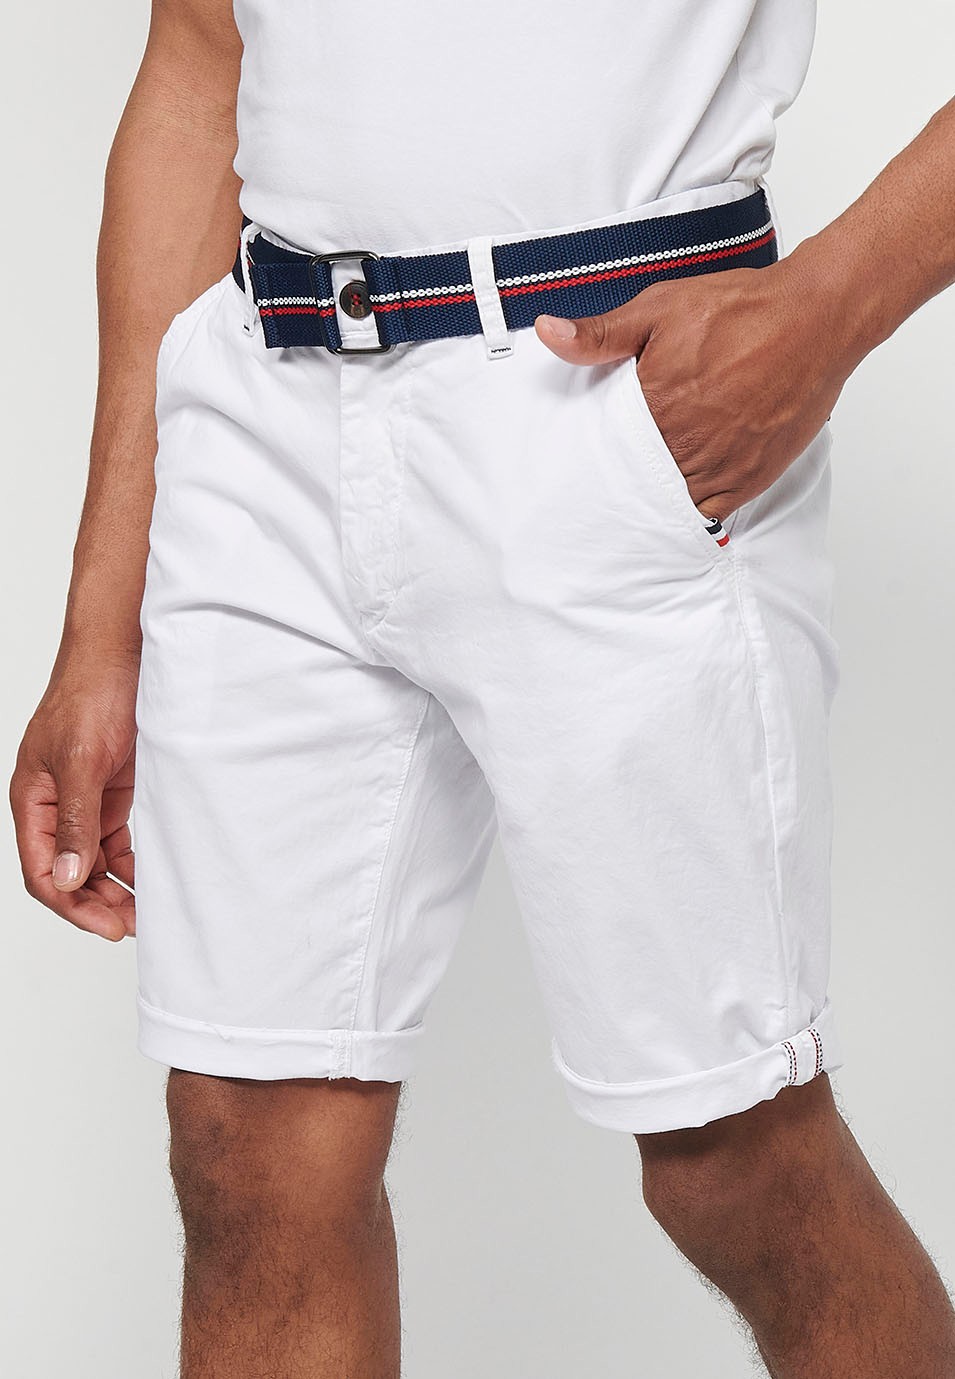 Shorts with a turn-up finish with front closure with zipper and button and belt in White for Men 1